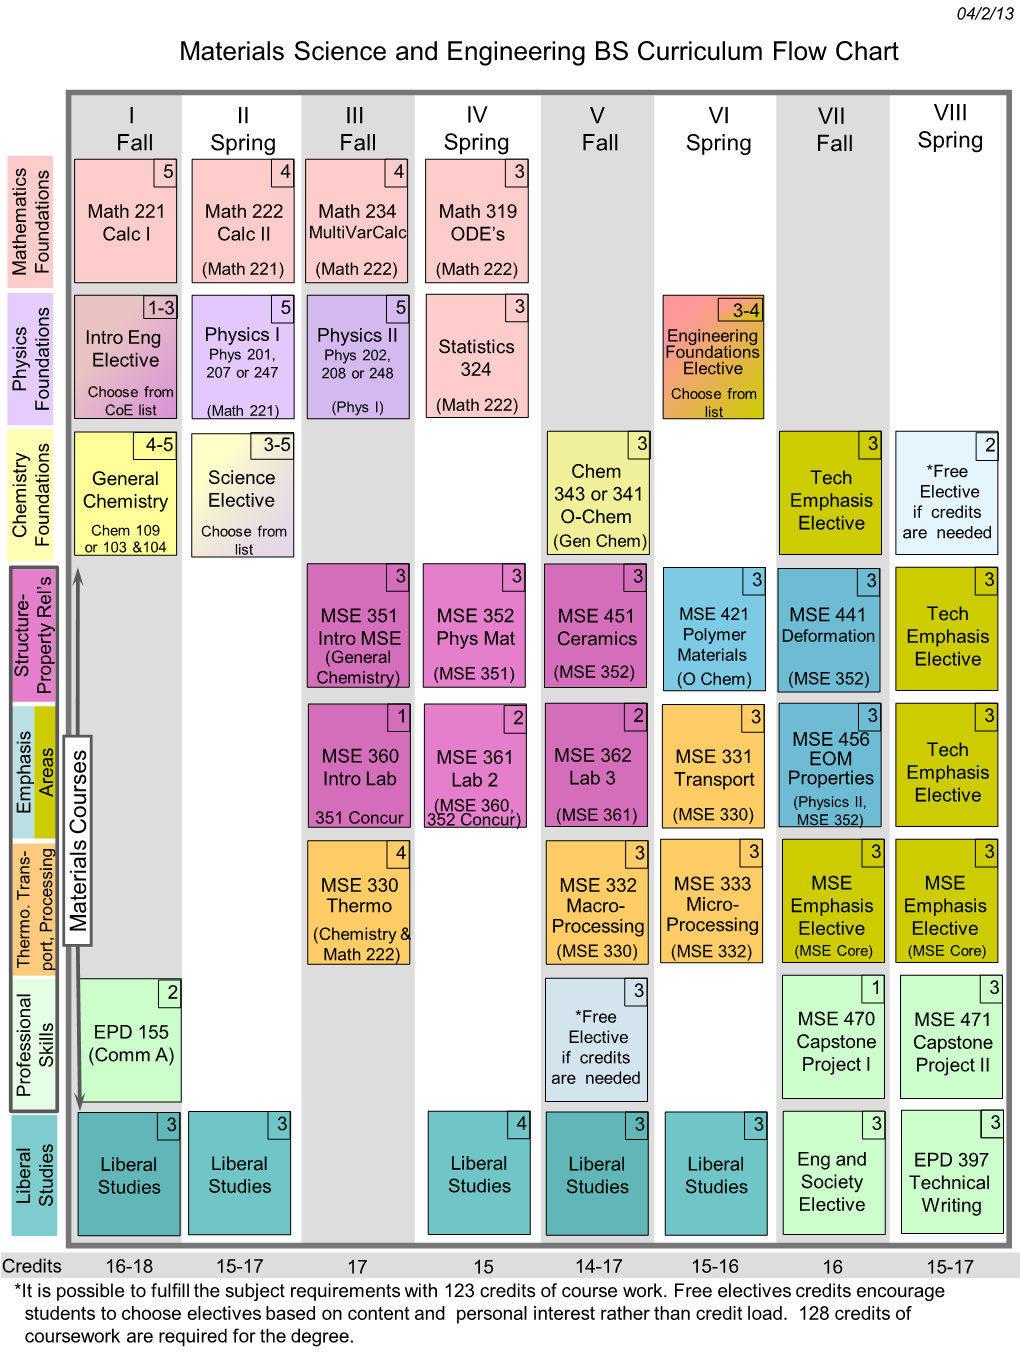 Materials Science and Engineering BS Curriculum Flow Chart